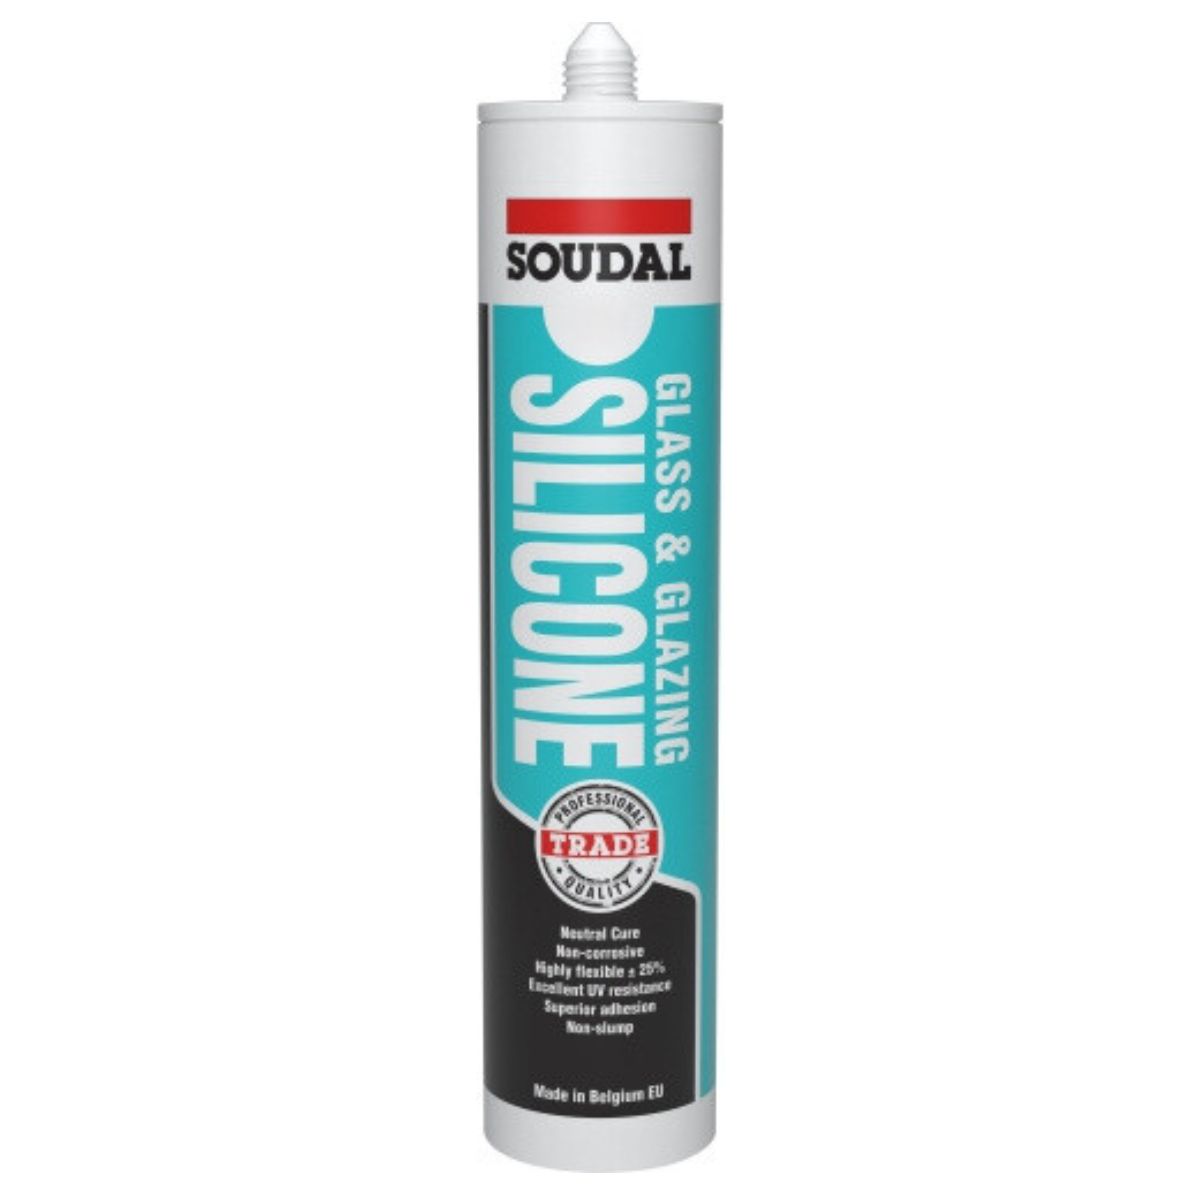 Soudal Trade Glass and Glazing Silicone, 300ml Matt Black 127781 - South East Clearance Centre